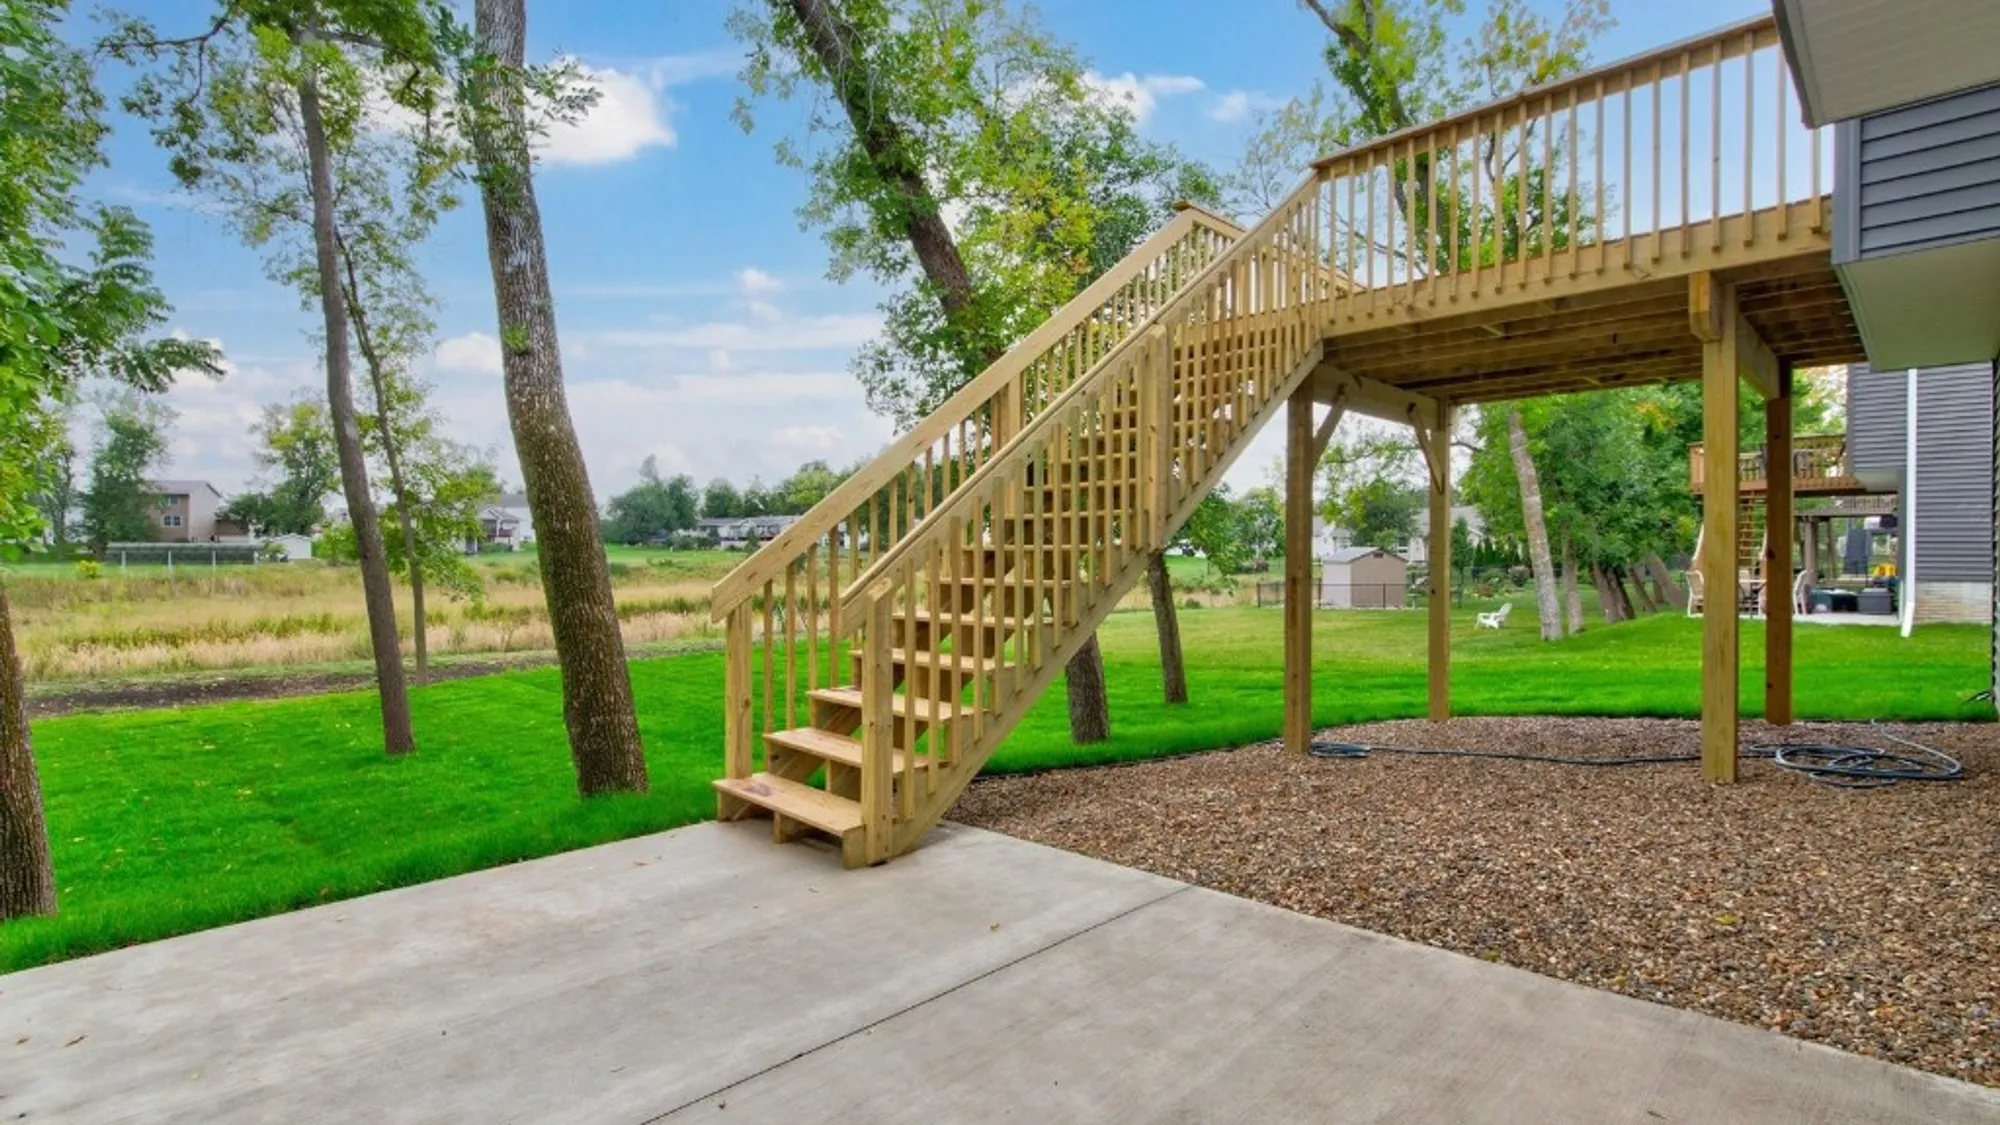 Enjoy nature from the deck or patio lot backs up to green space